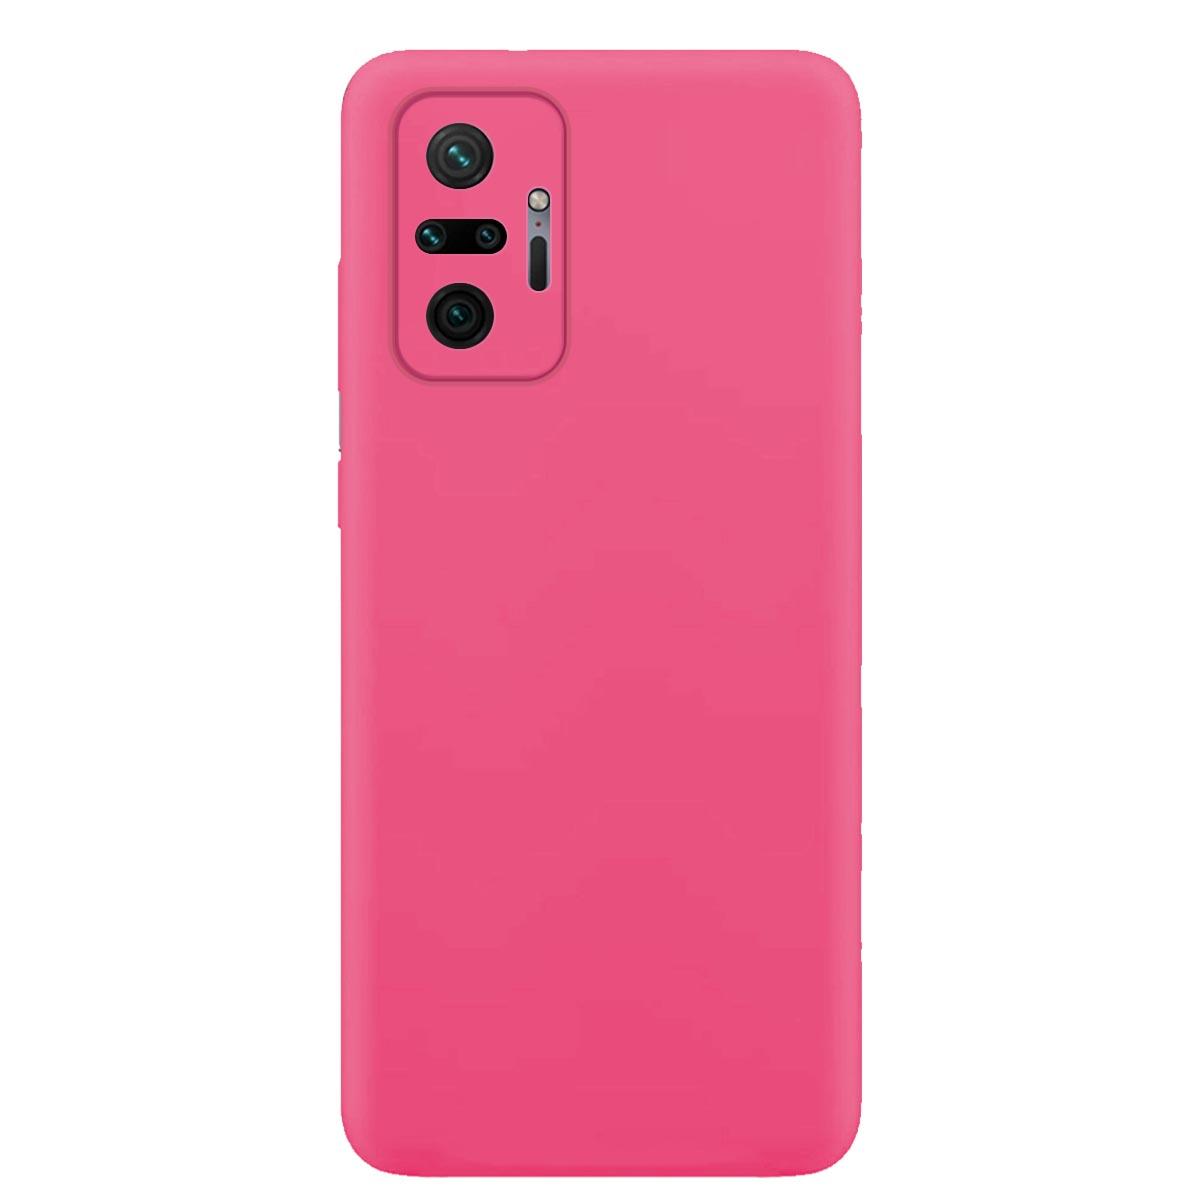 Backcover, Pro MORE Pink Xiaomi, Max, Redmi Hot 10 MTB Note 10 Case, Redmi ENERGY Pro, Soft Note Silikon